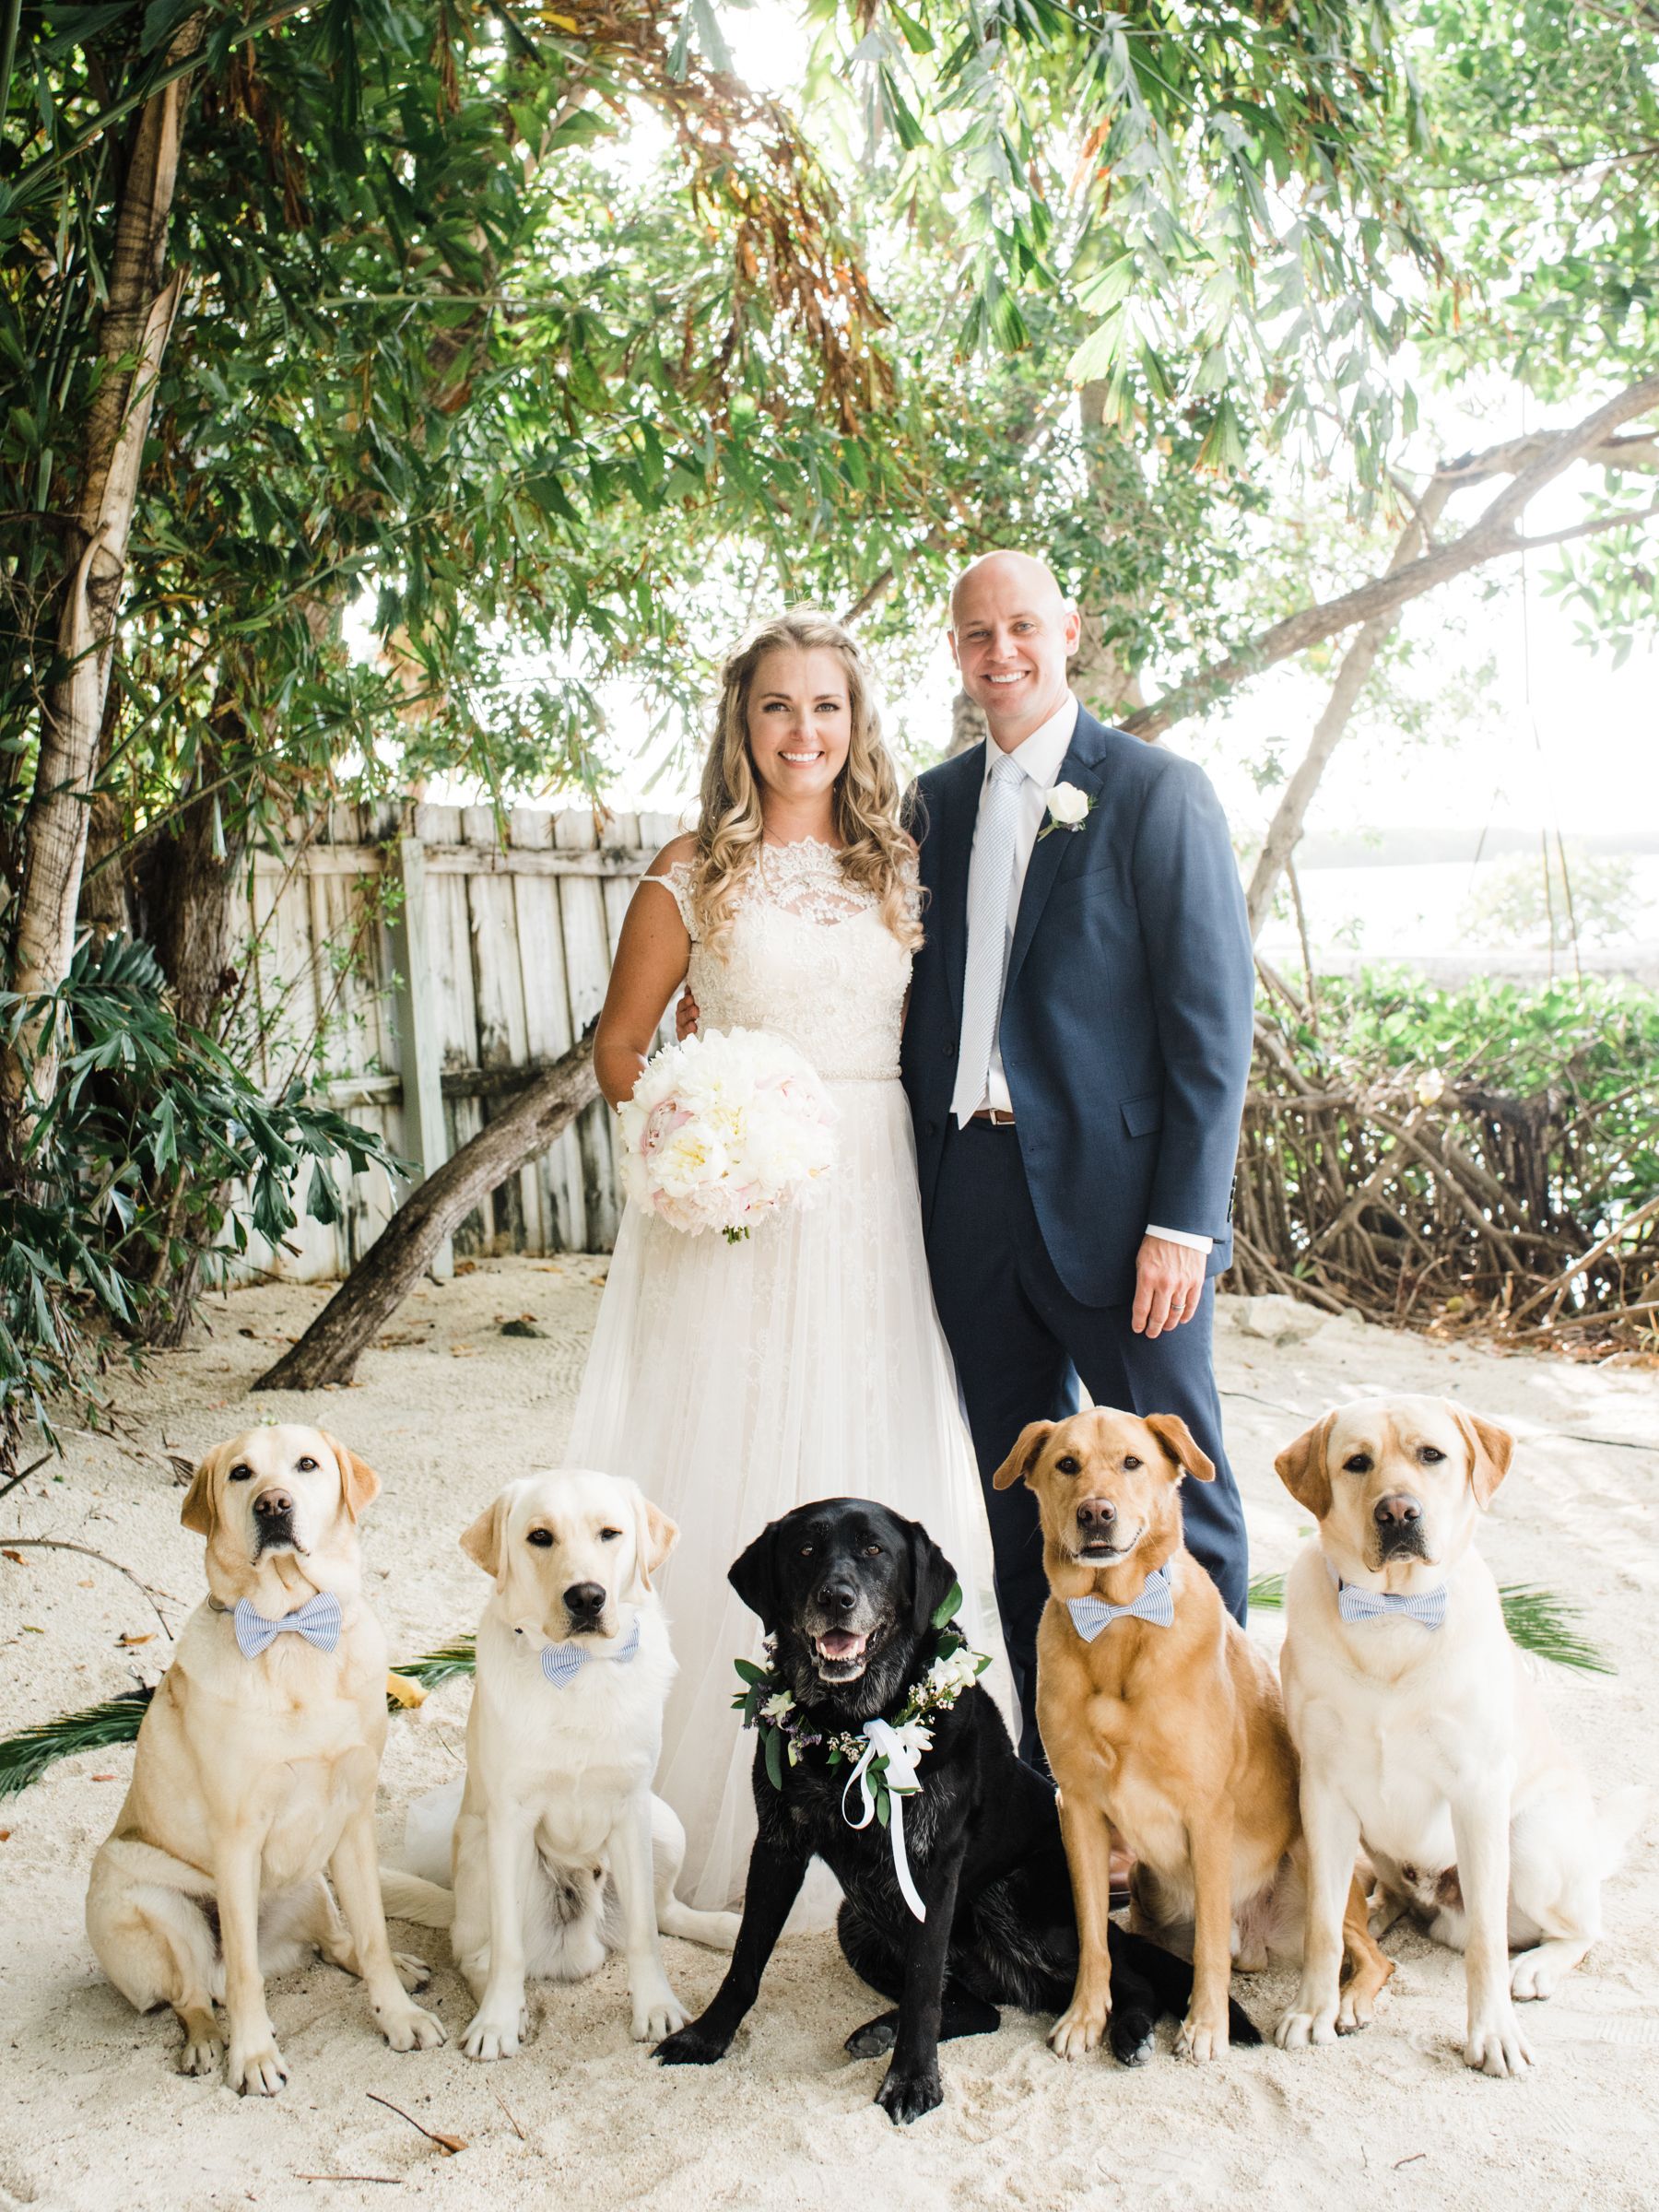 4 Cute Ways to Incorporate Your Dog into Your Wedding